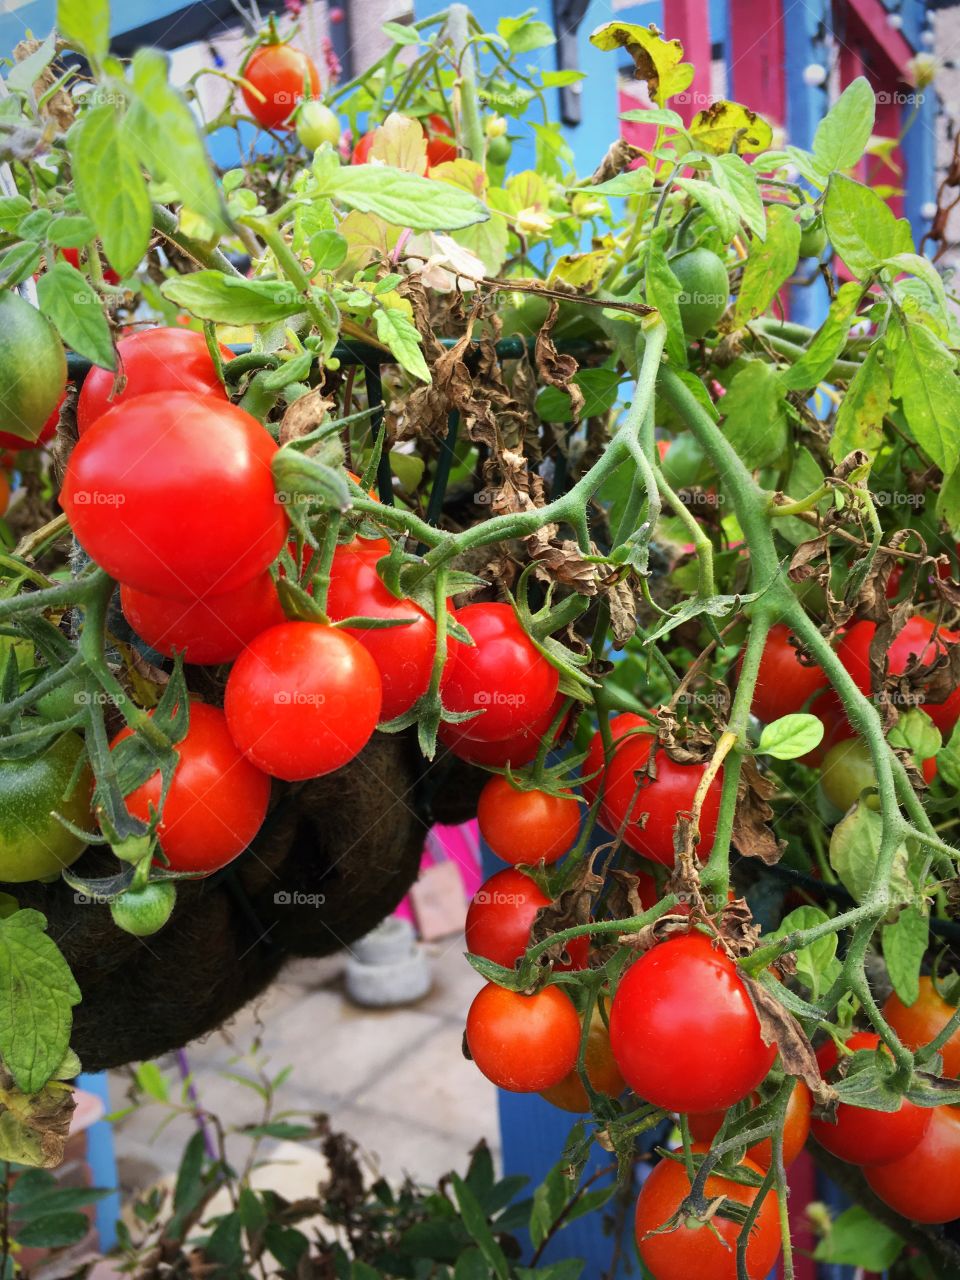 Grow your own tomatoes 